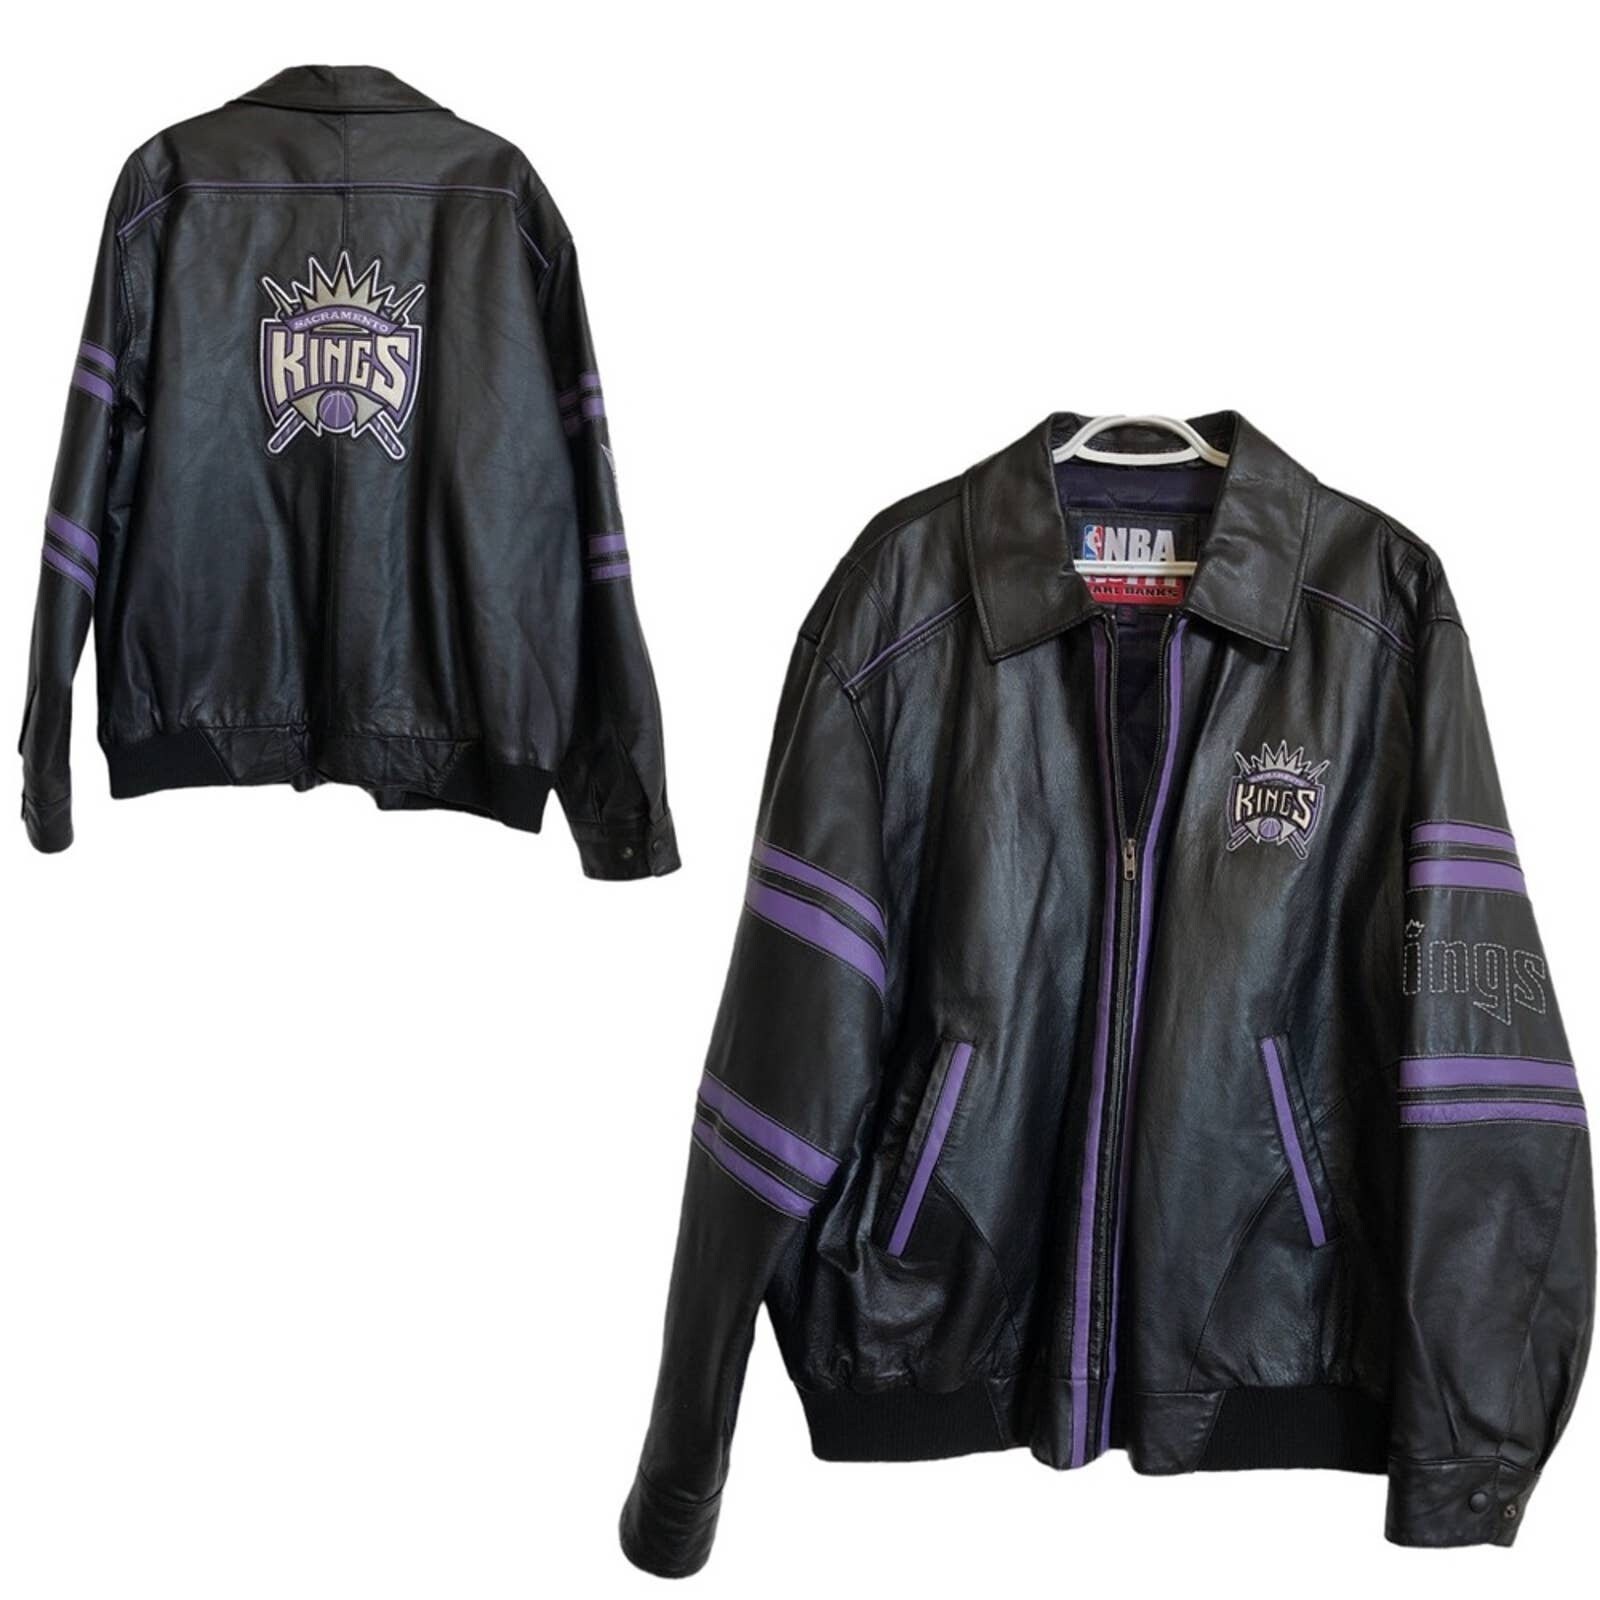 At Auction: Men's Leather Basketball Jacket